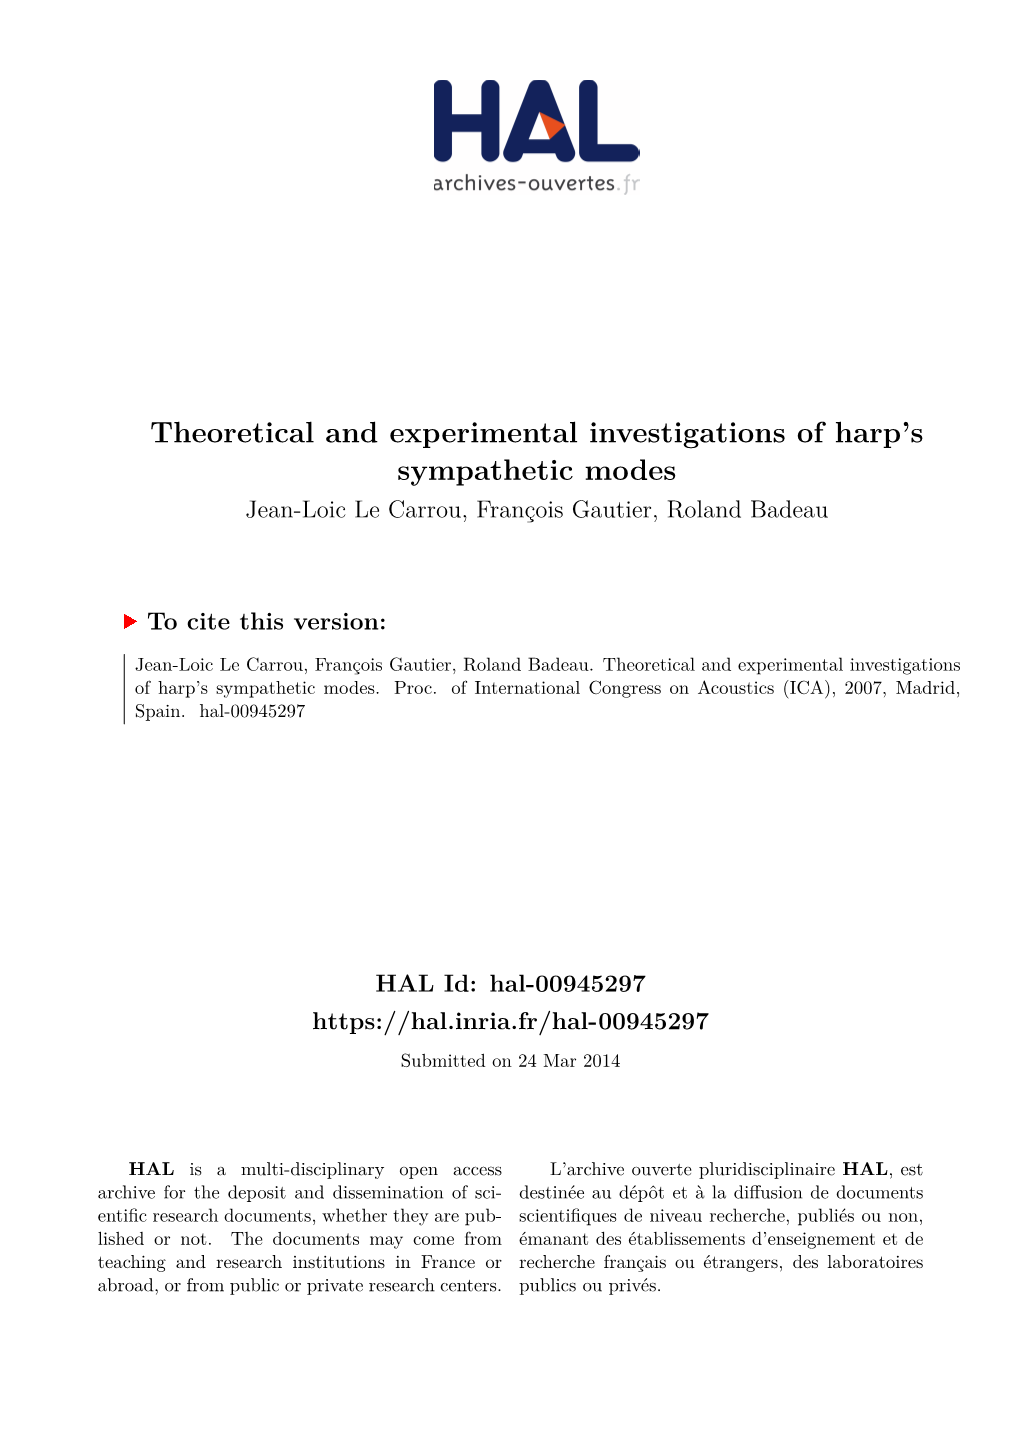 Theoretical and Experimental Investigations of Harp's Sympathetic